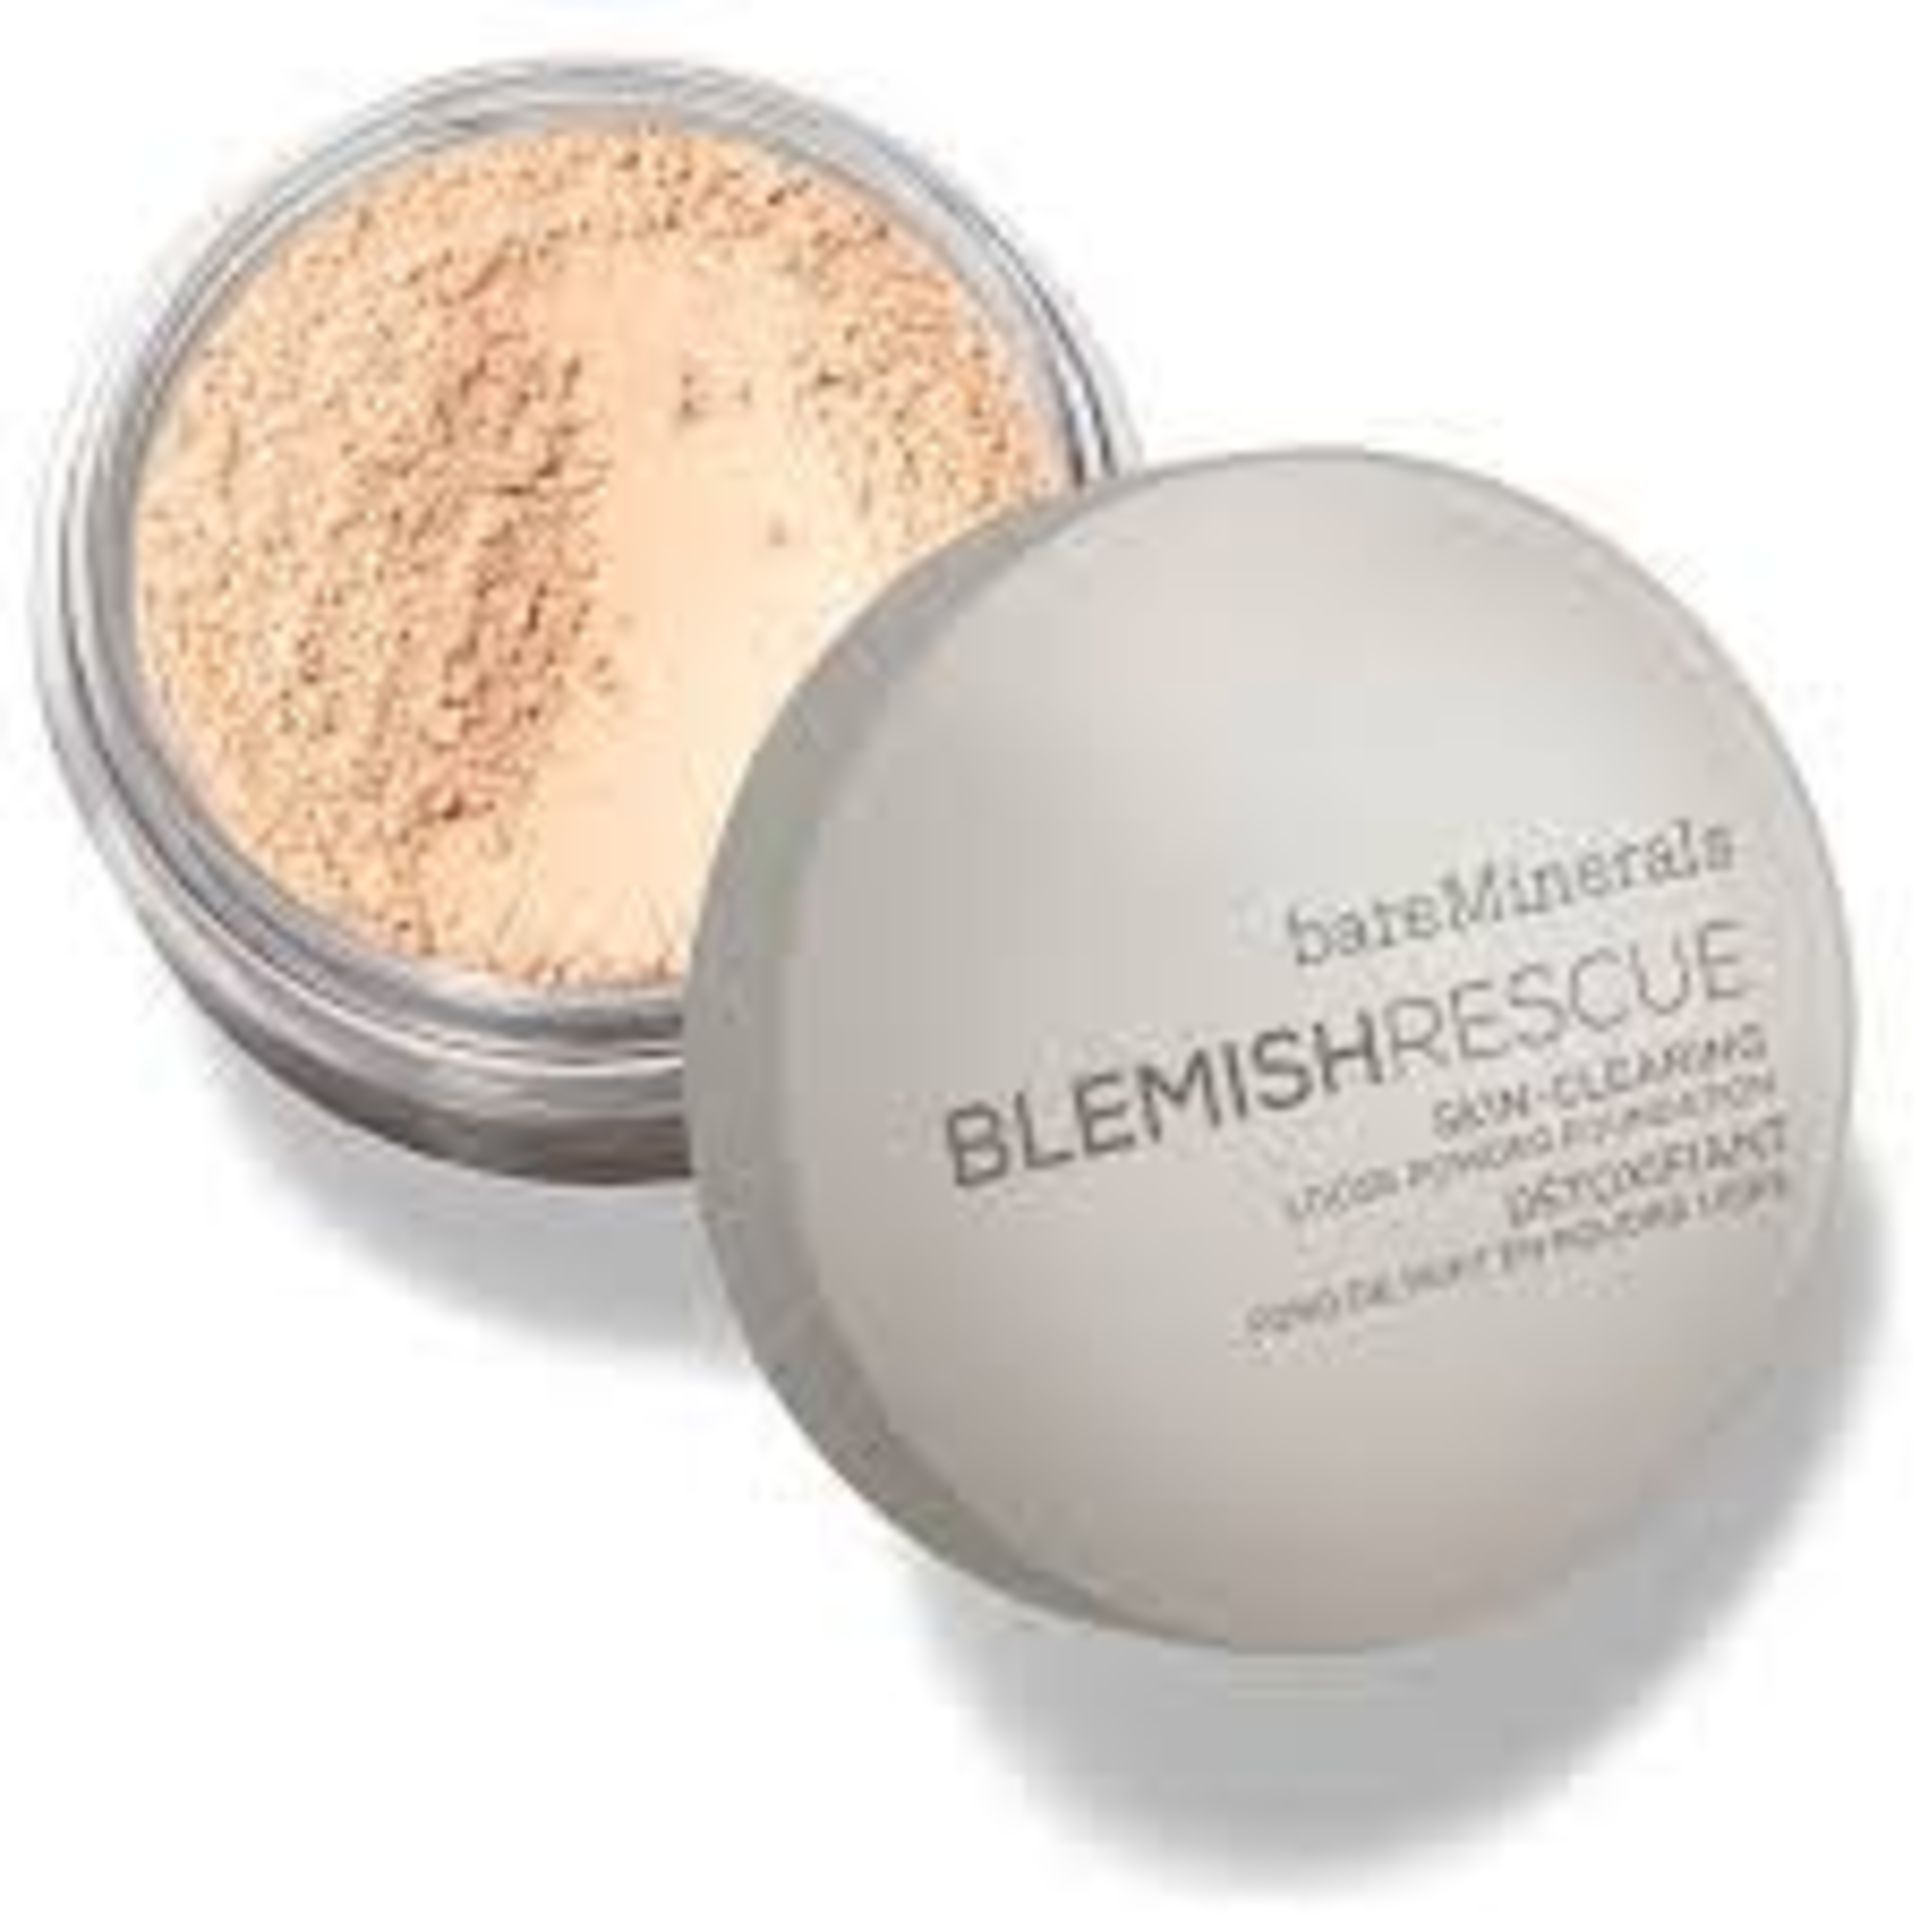 Rrp £29 Bare Minerals Blemish Rescue Light 2W Skin Clearing Loose Powder Foundation (0.21Oz) (Ex Dis